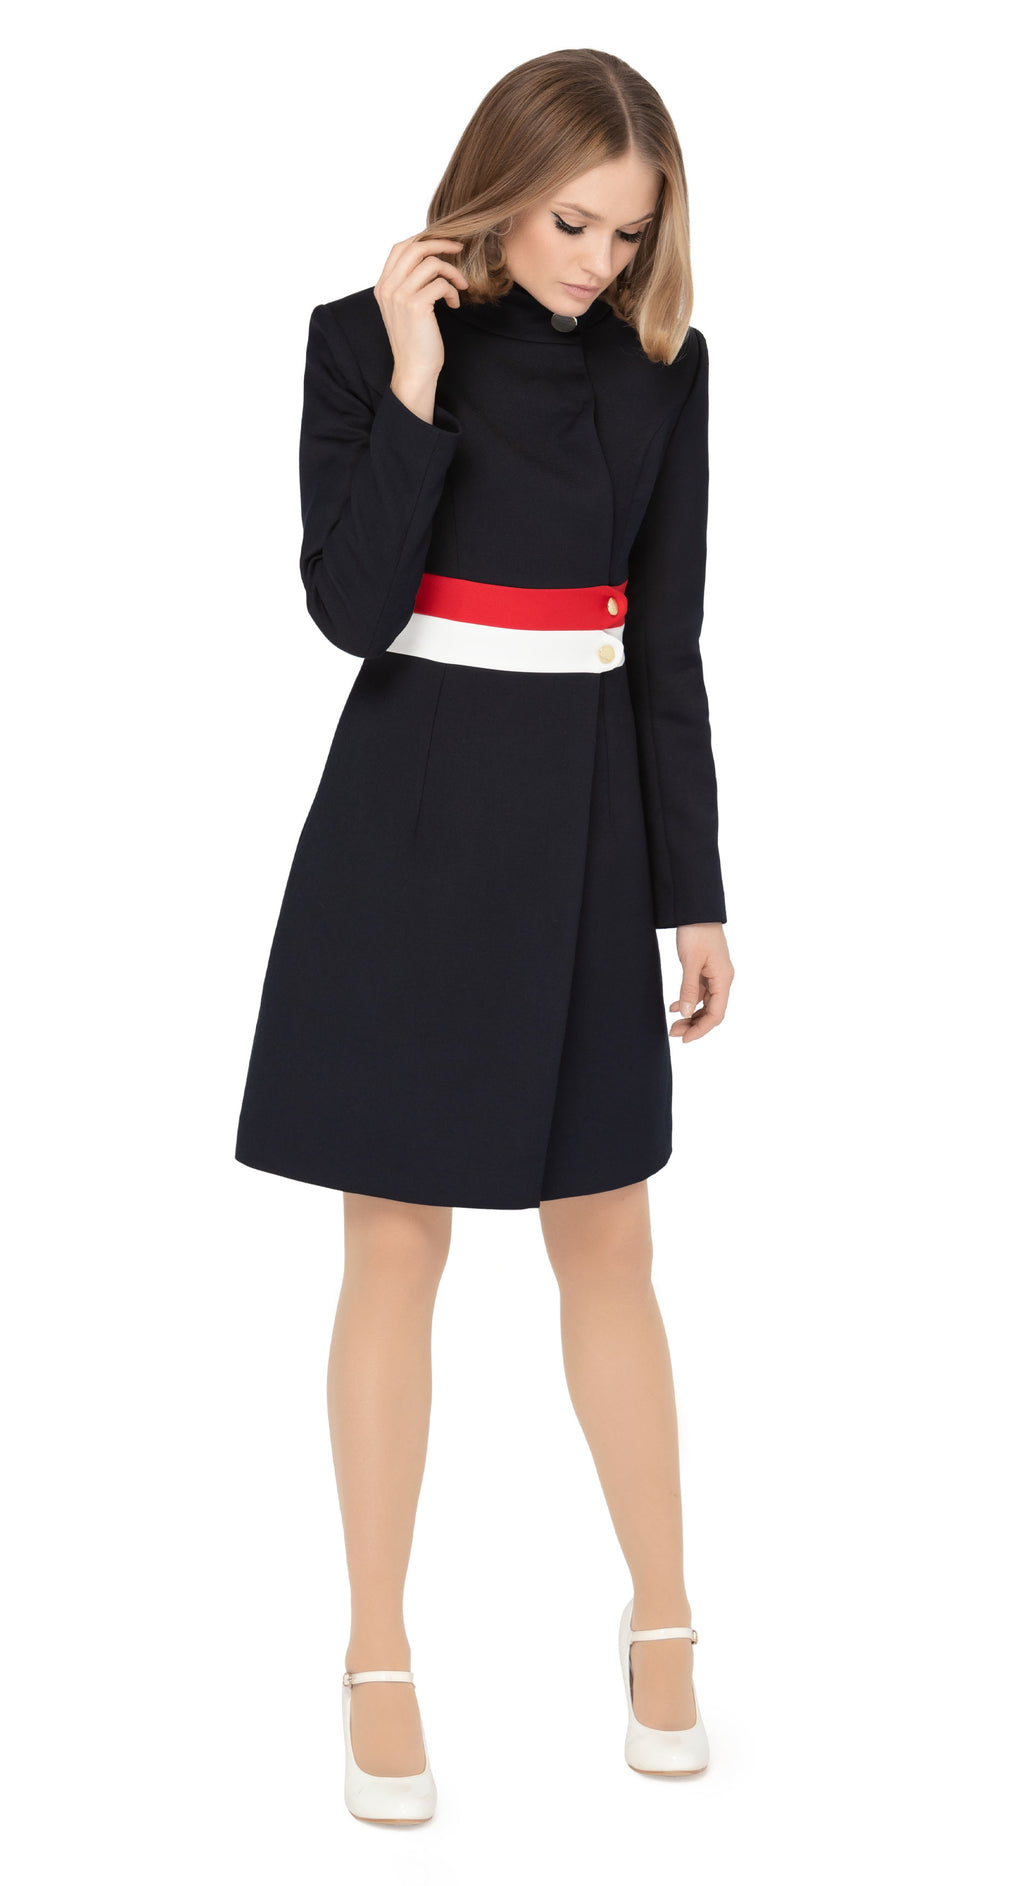 Fitted tricolor fair-weather coat with navy blue as the primary colours leading into light cream and red bands around the waistline. Fully lined with a gold coloured button closure and invisible essentials side pockets.  Pairs well with our Sixties Style Navy/Red/Light Cream Dress to complete a very wearable and versatile high fashion style for all occasions.